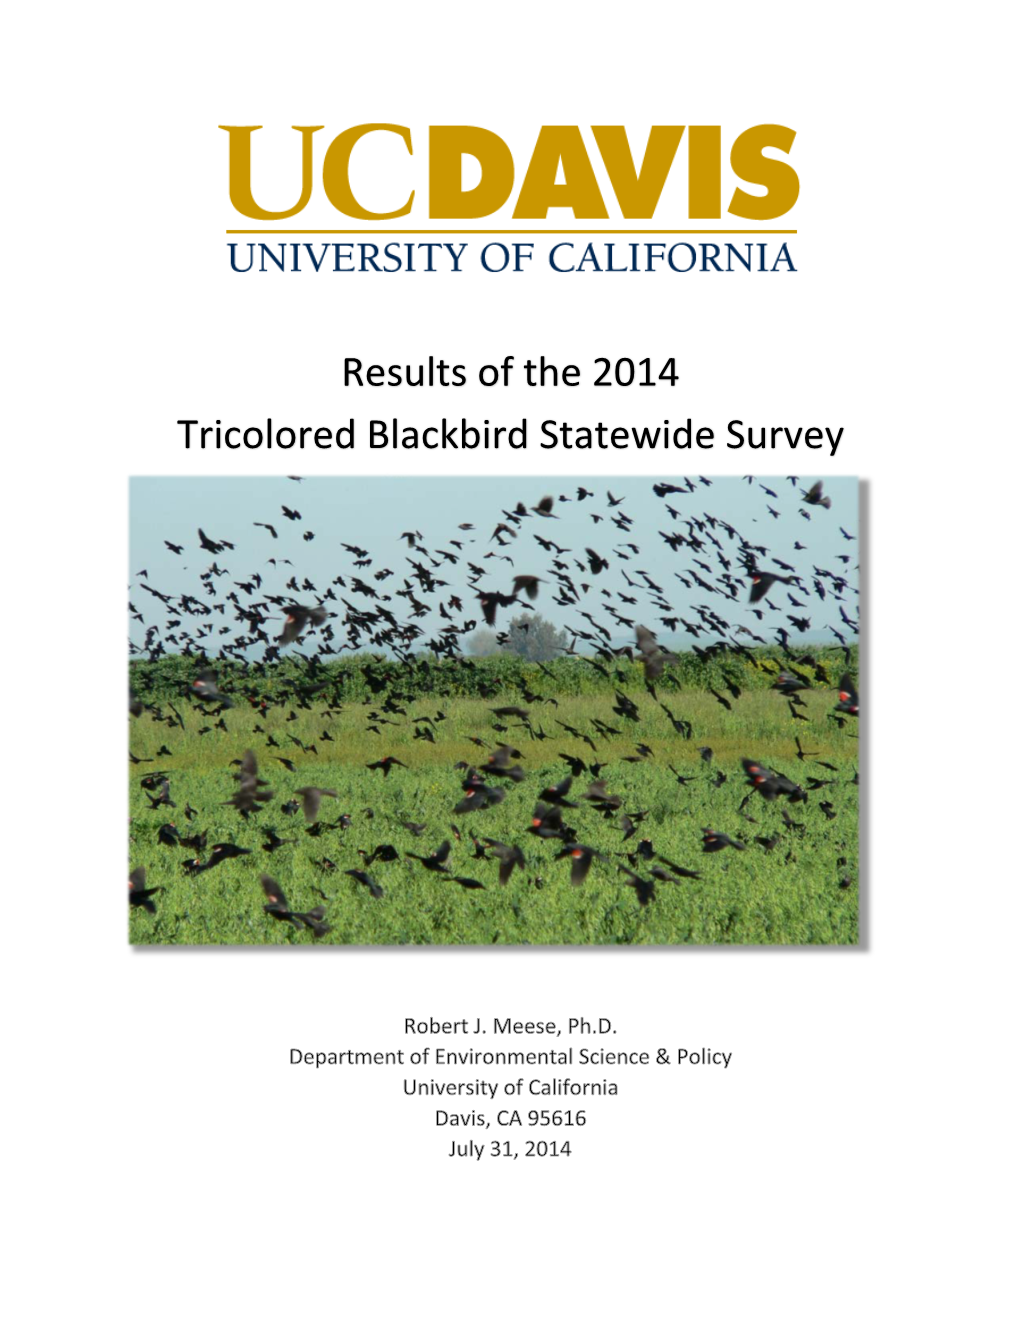 Results of the 2014 Tricolored Blackbird Statewide Survey